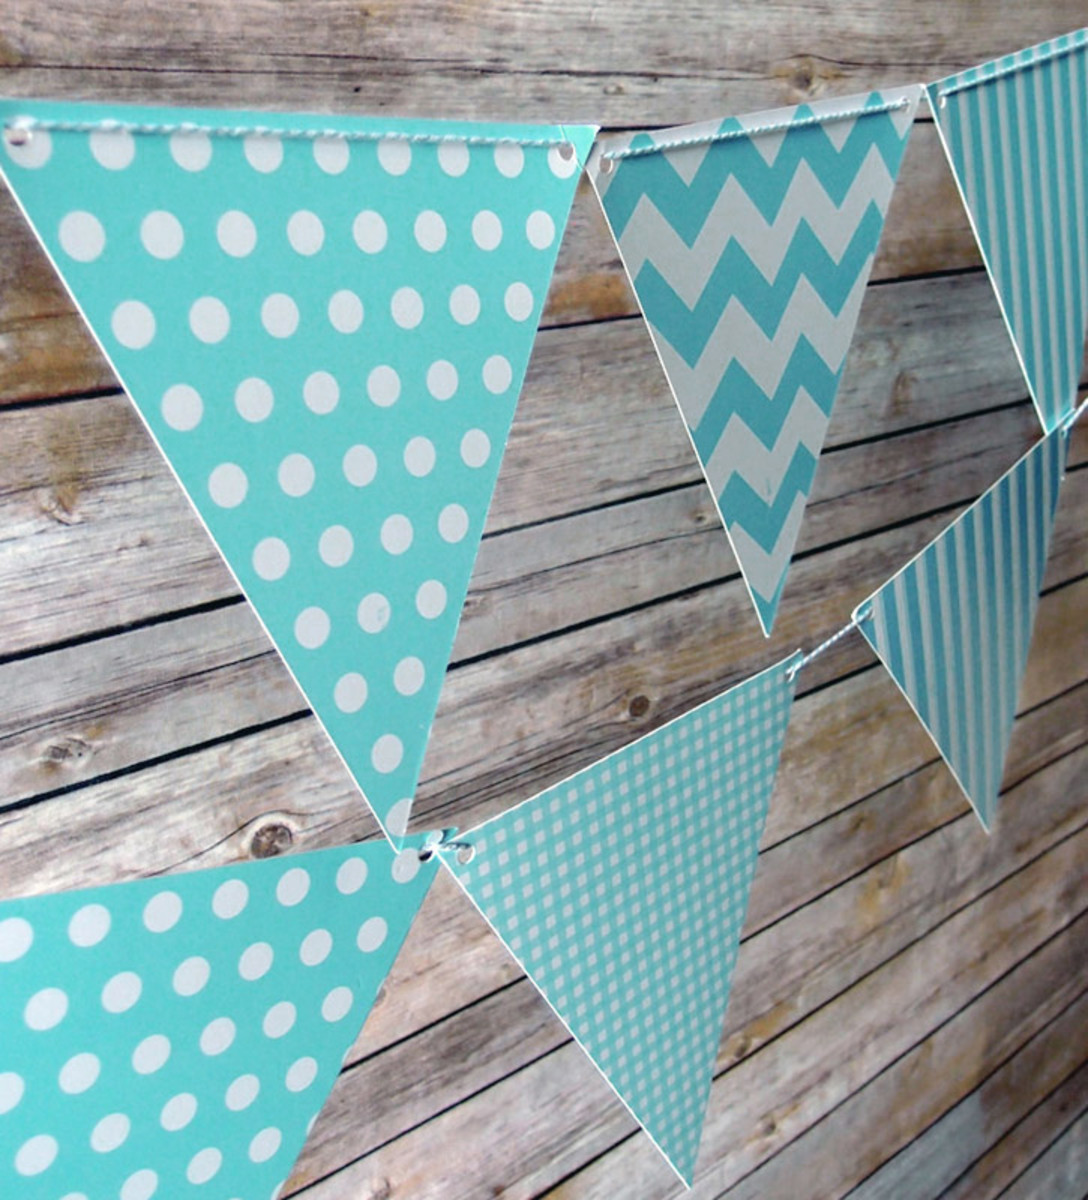 Pennant banners are an easy and cheap way to decorate the walls in your child's room